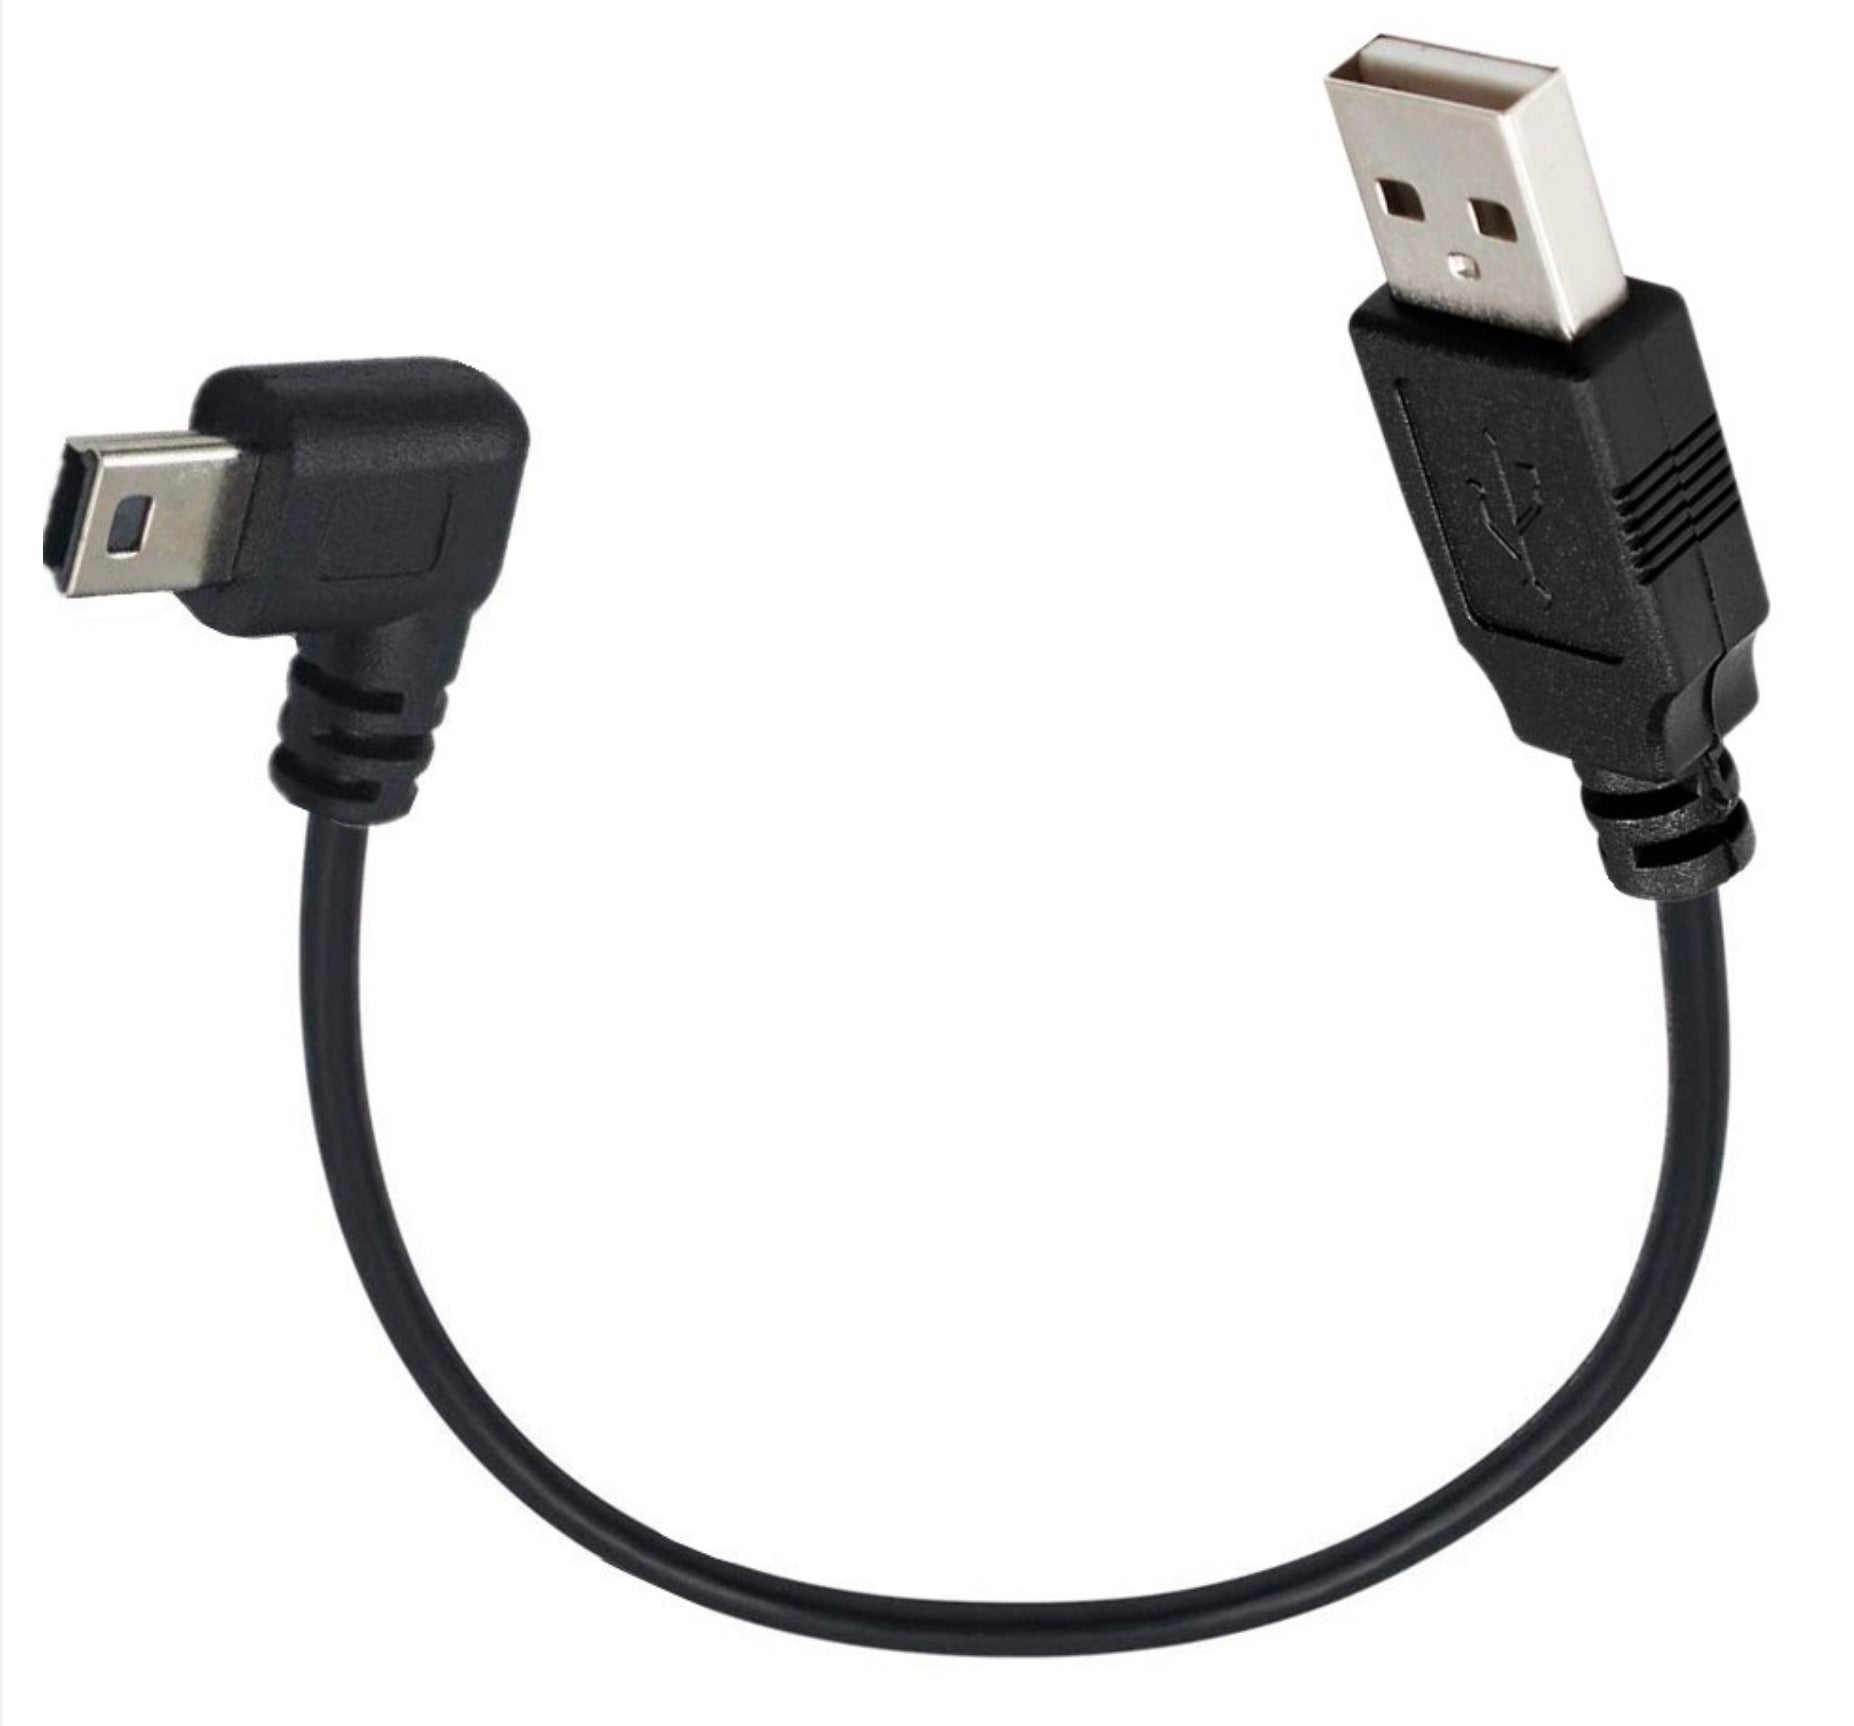 USB 2.0 Type A to Mini B Data Sync & Charging Cable 0.25m